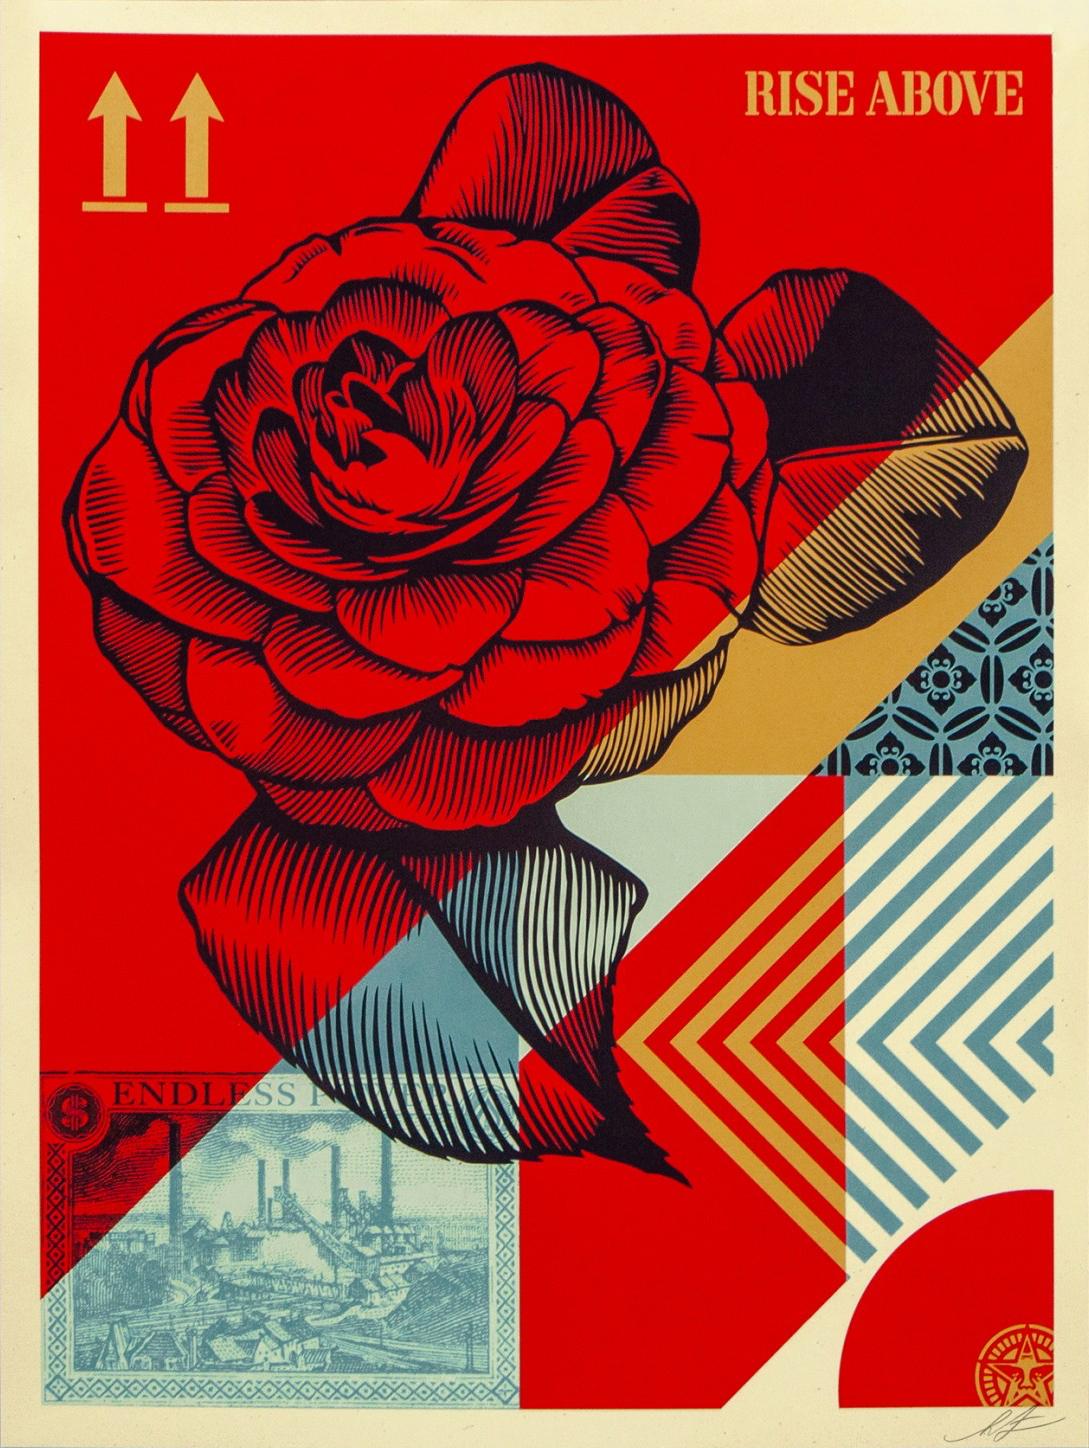 obey poster